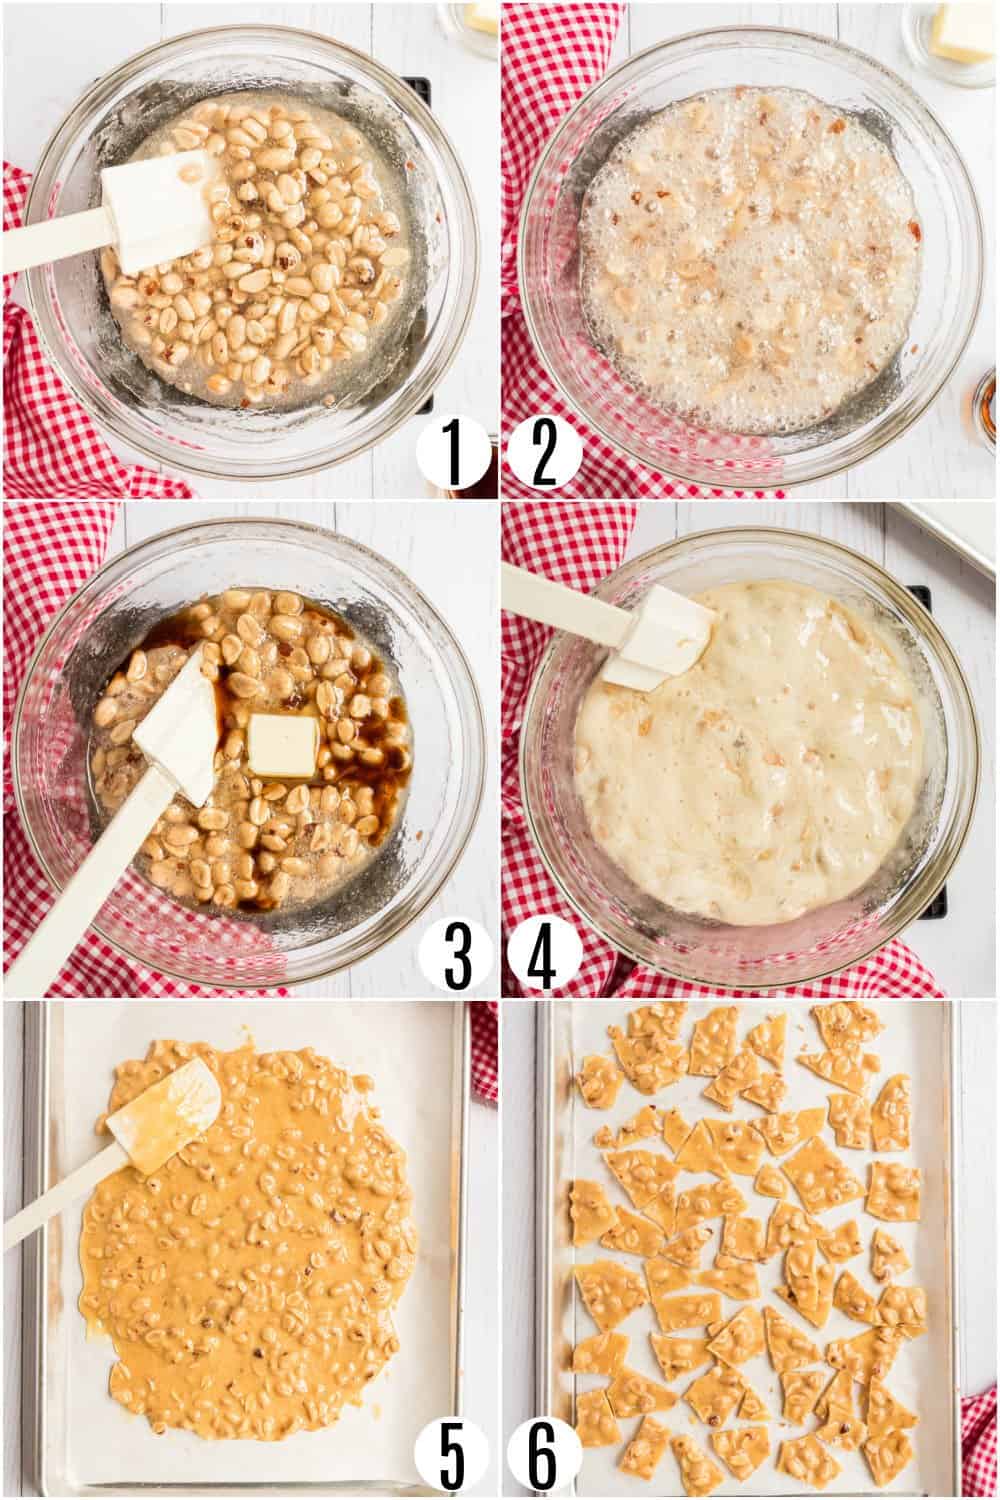 Step by step photos showing how to make homemade peanut brittle.